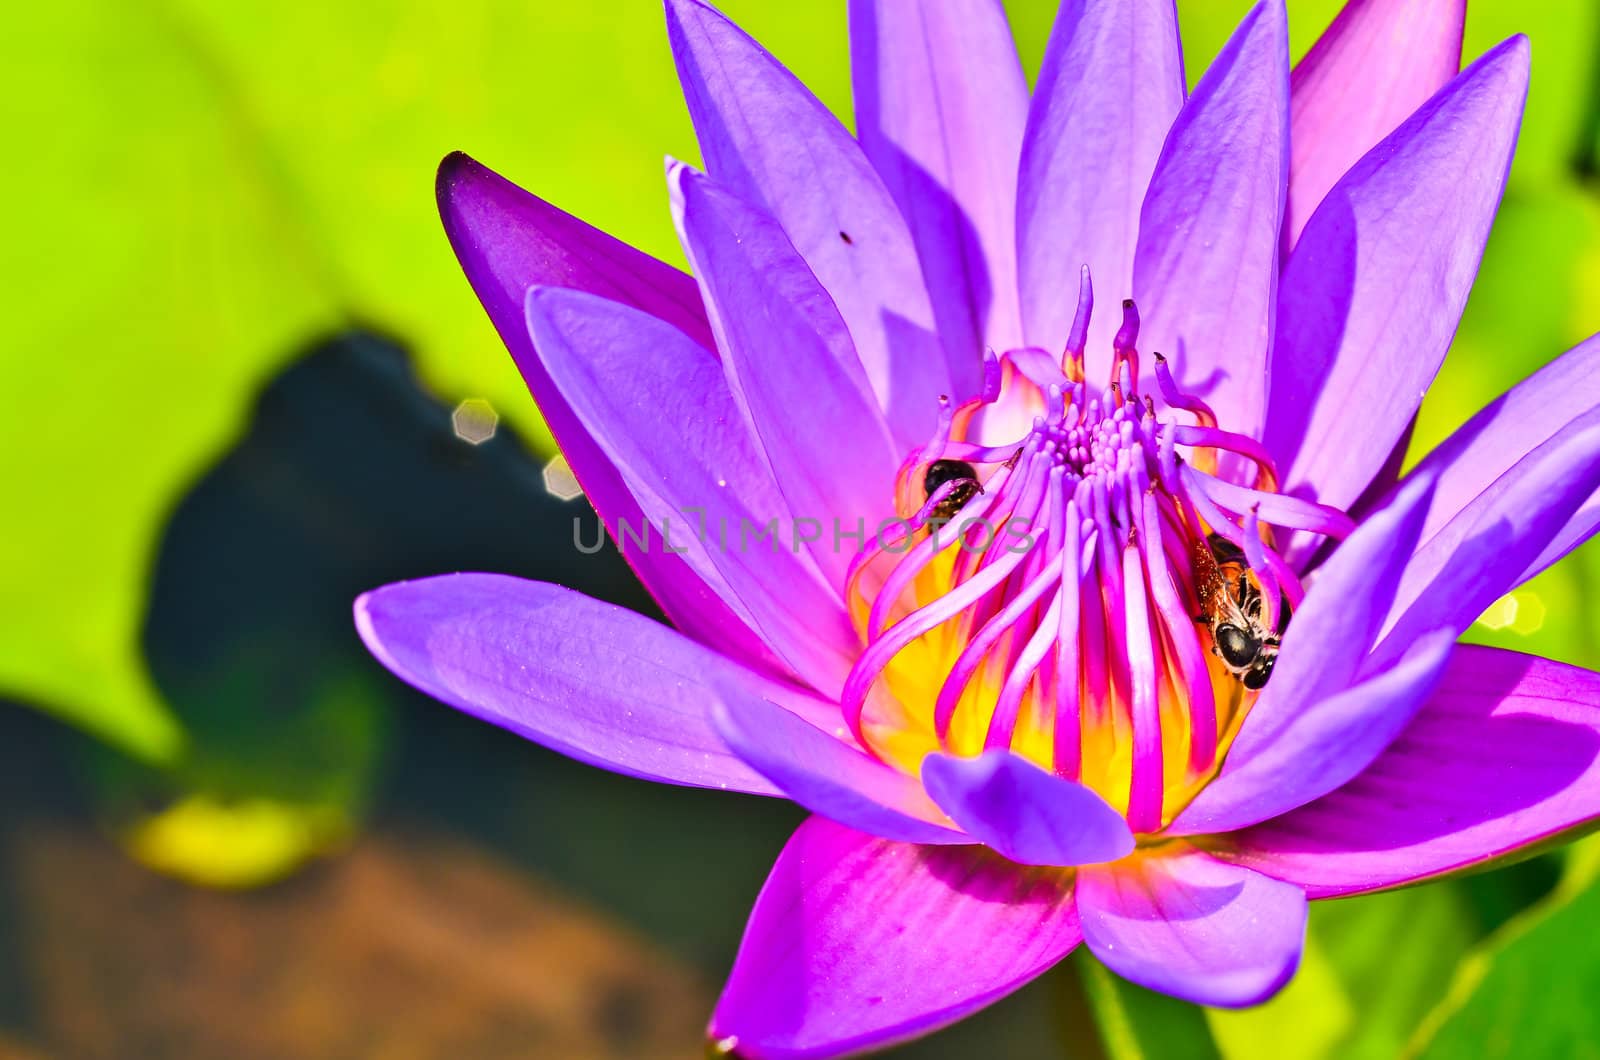 Bee on the water lily flower